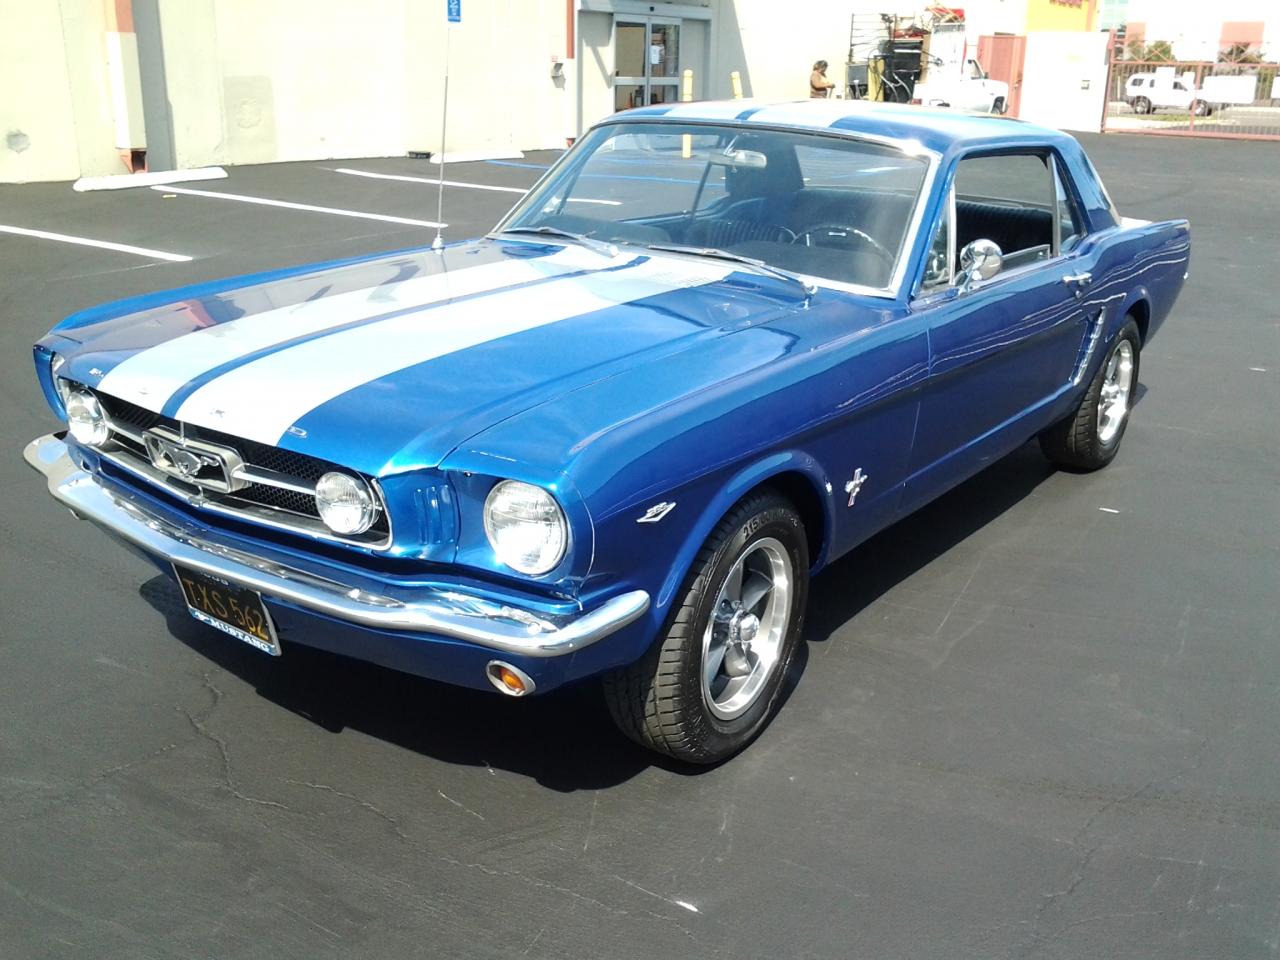 1965 Ford mustang for sale in southern california #1